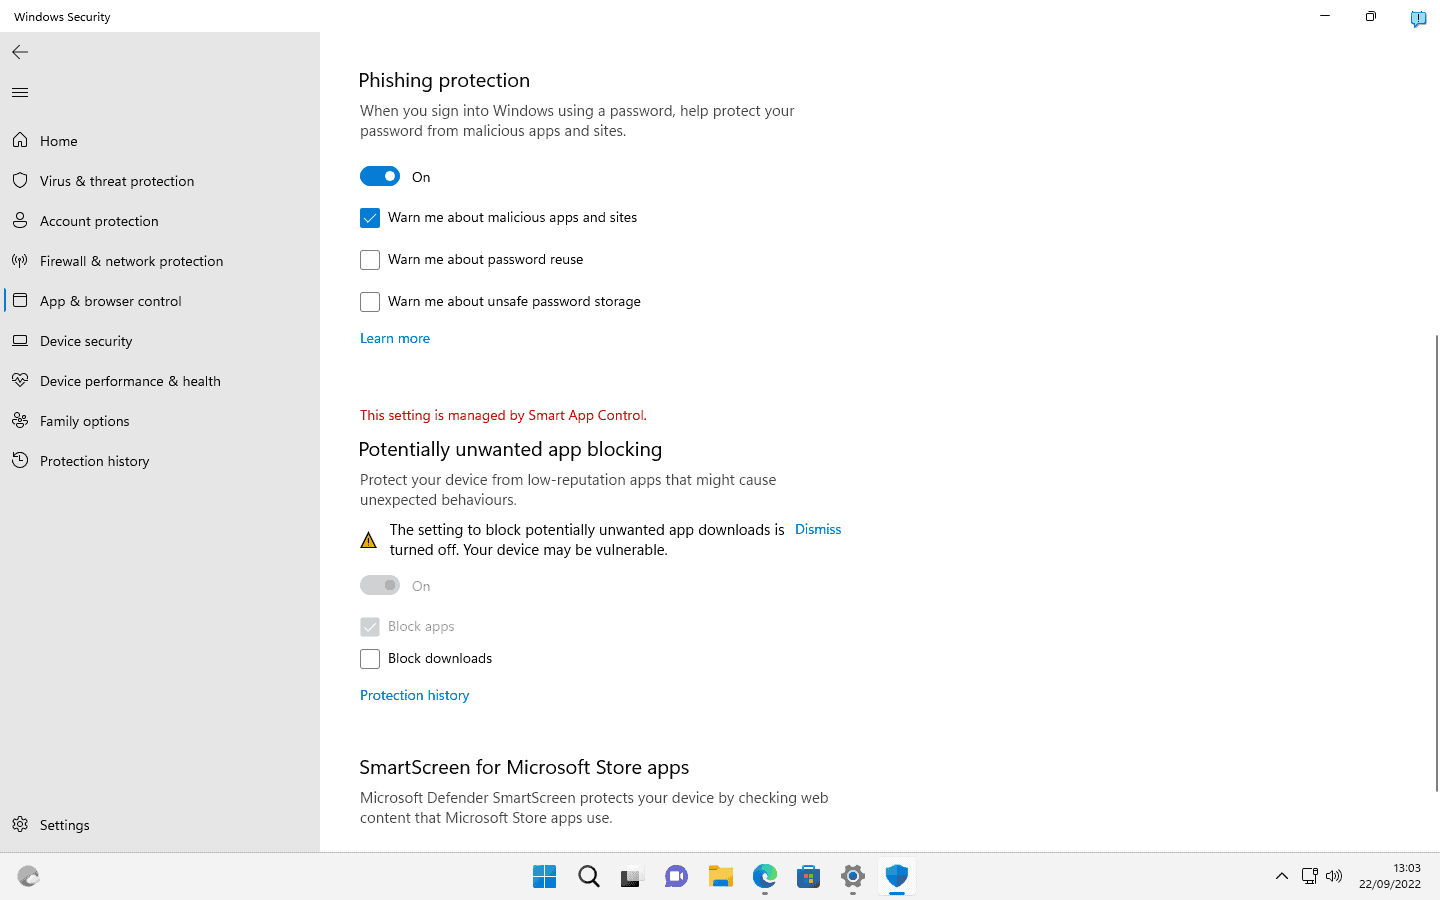 Windows 11 2022 Update: security improvements phishing-protection.png